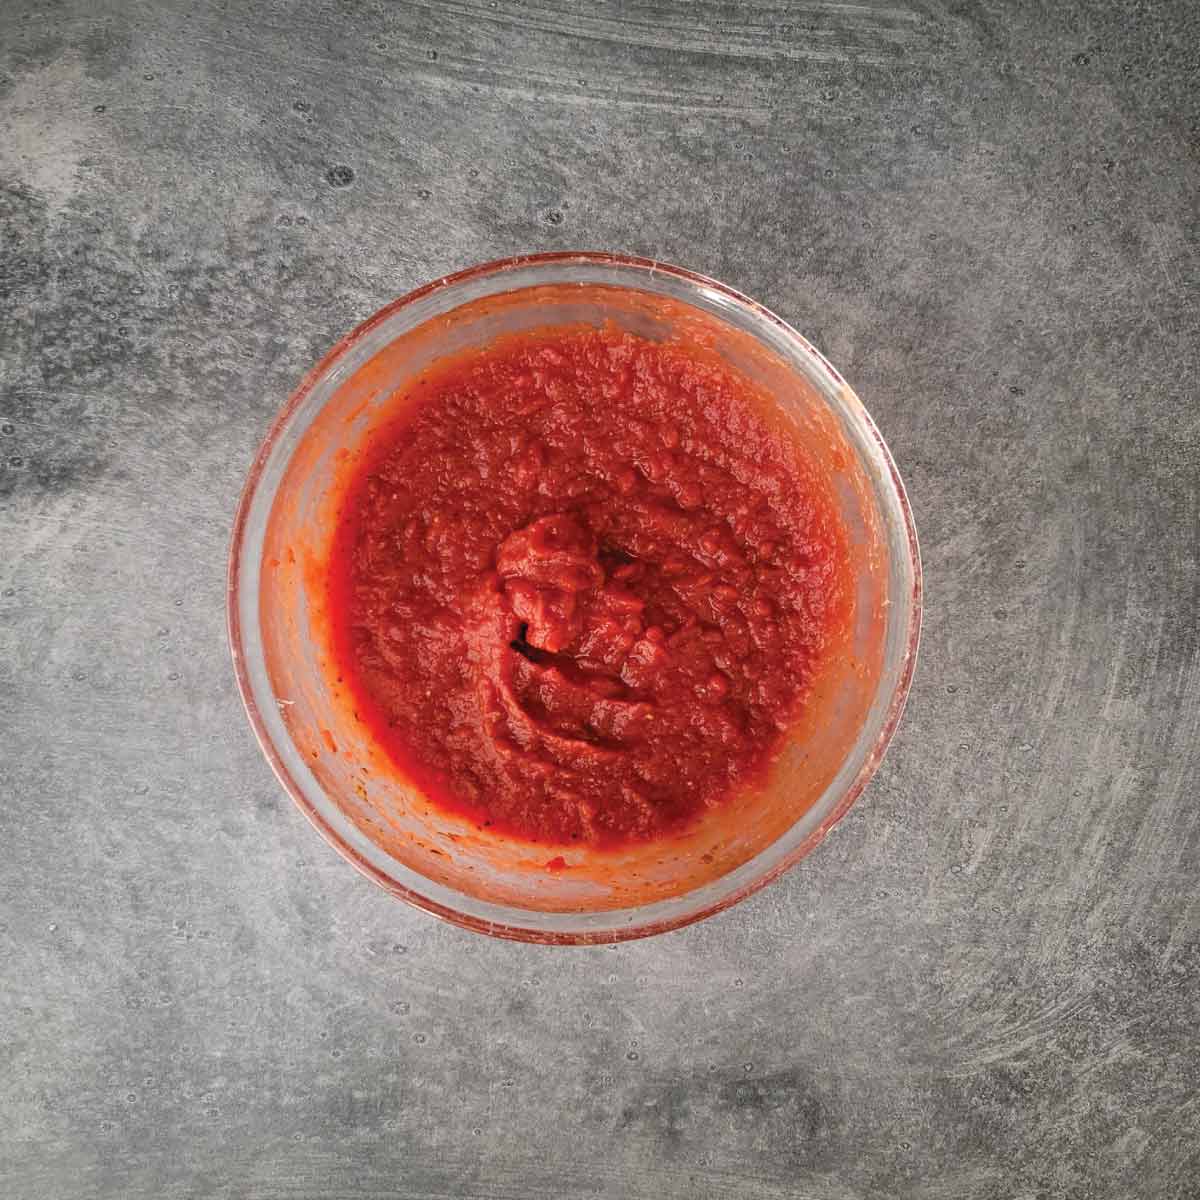 Homemade pizza sauce in a bowl ready to use.